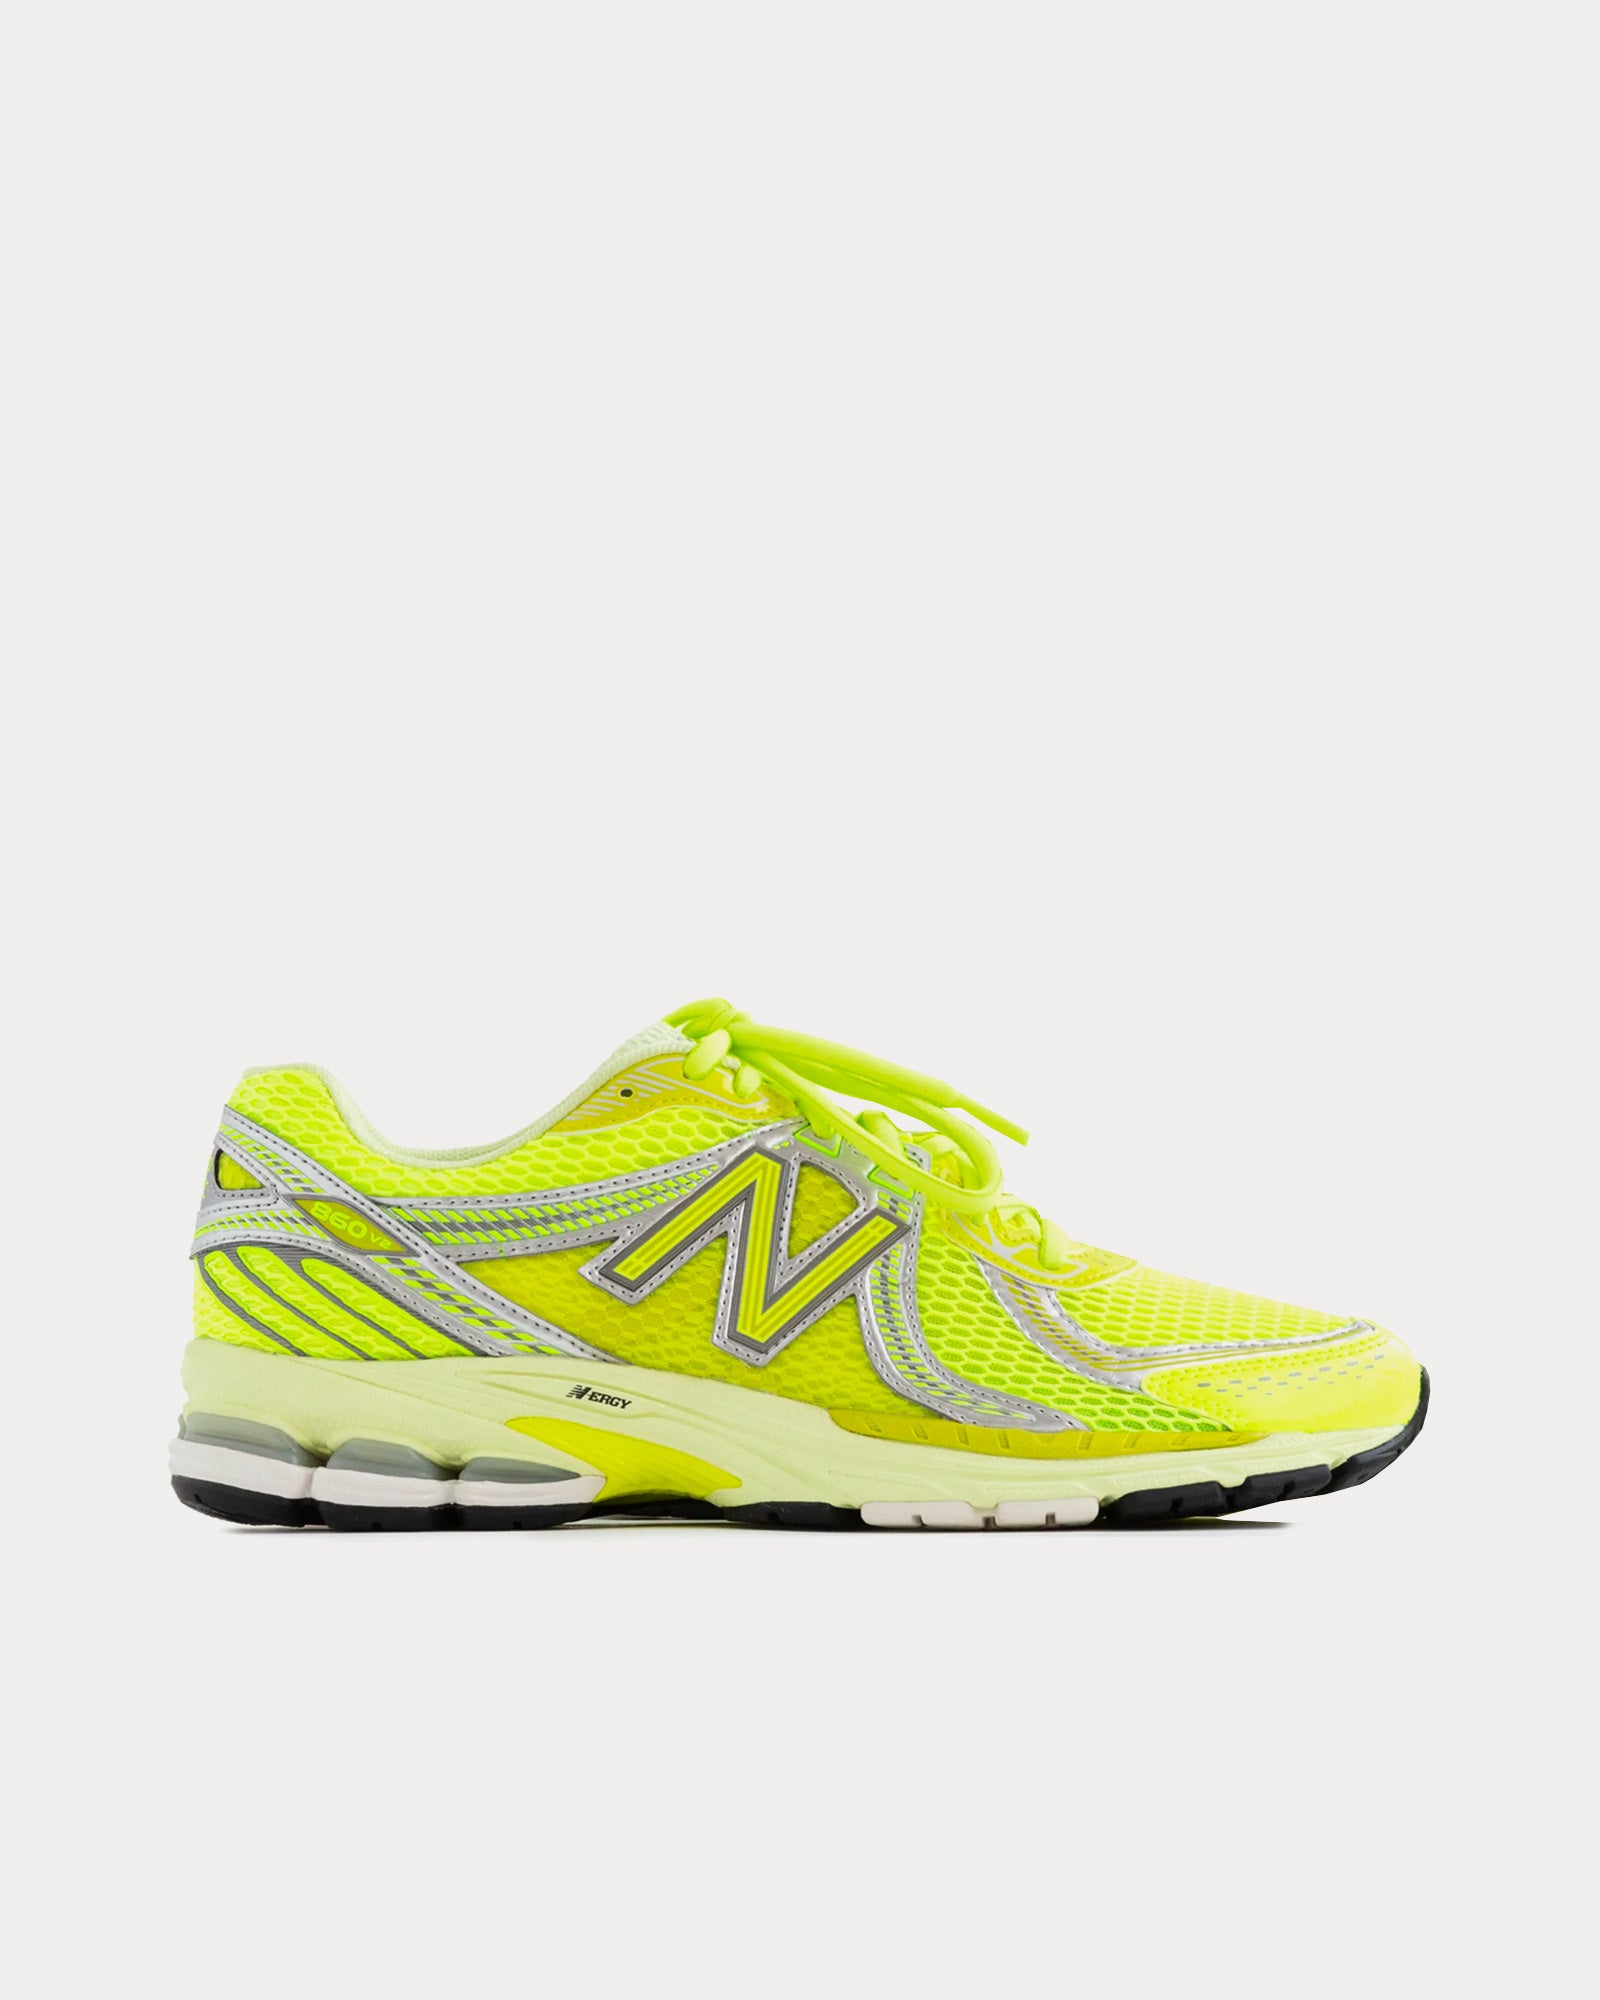 New Balance x Aime Leon Dore - 860v2 Yellow Low Top Sneakers